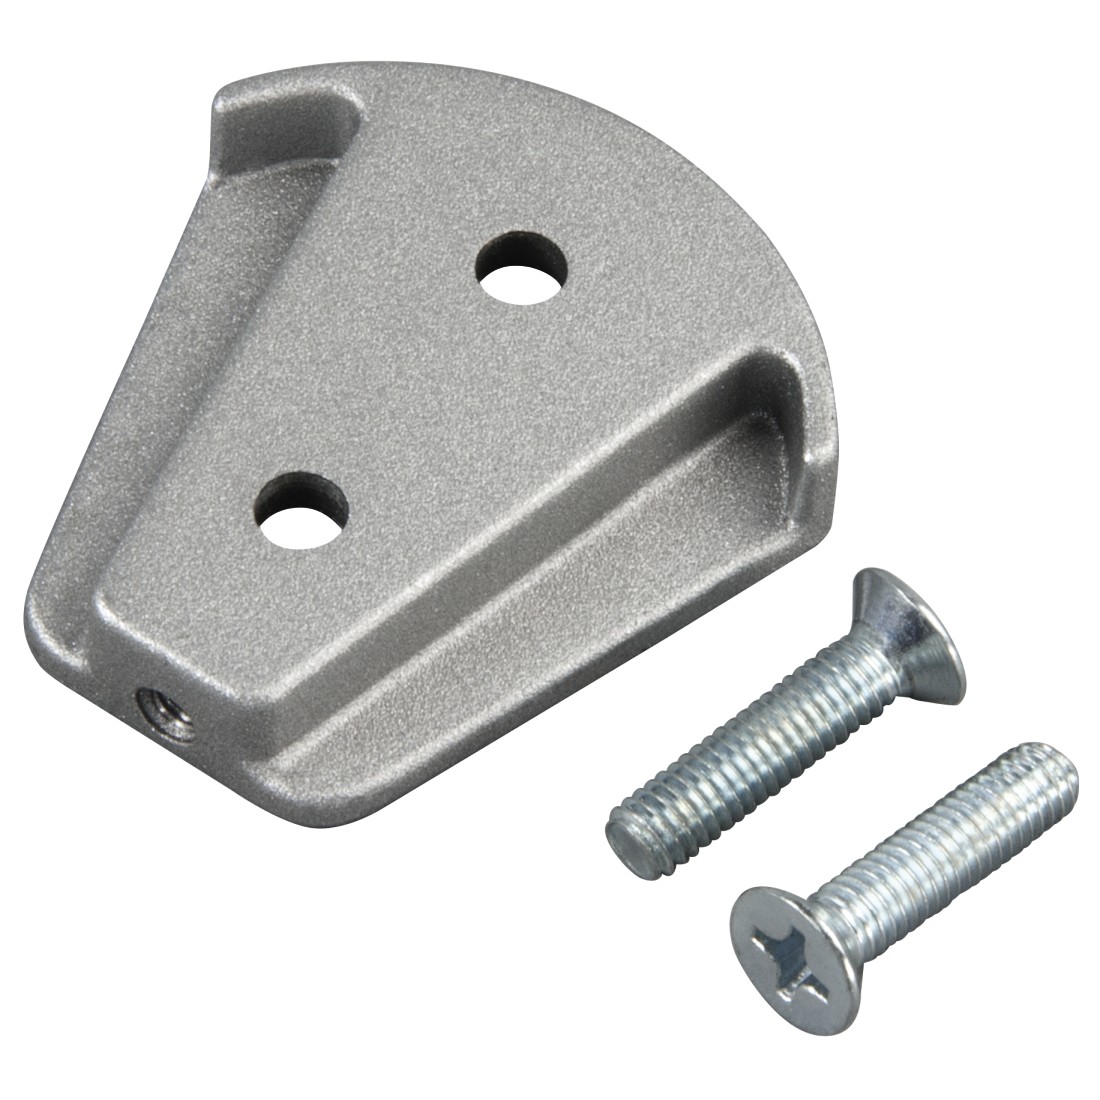 Hama Wall Bracket for tablets from 7in to 10.5in